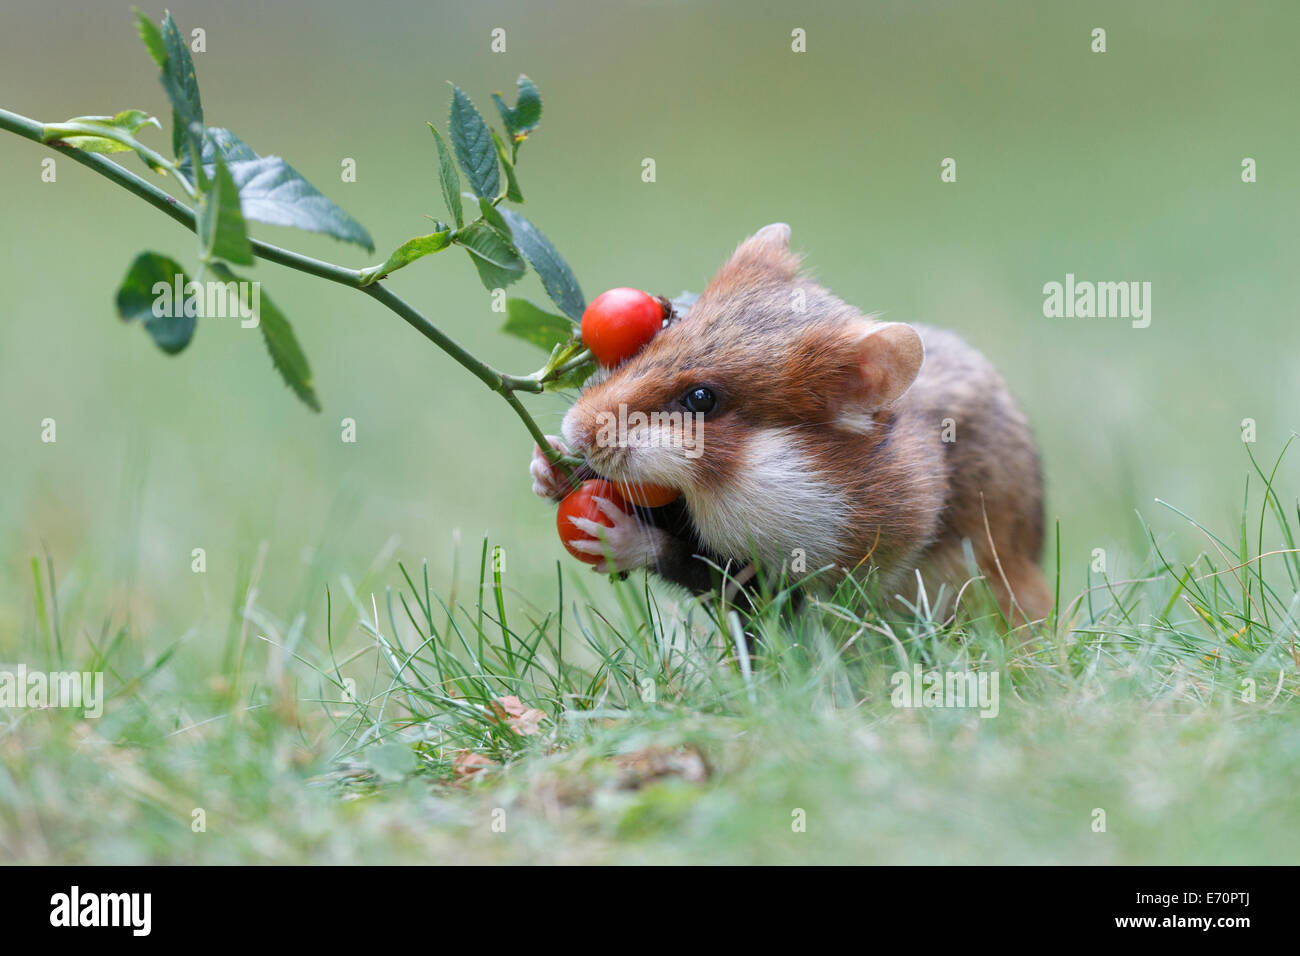 Hamster (Cricetus cricetus) taking a rosehip for its hoard, Austria Stock Photo